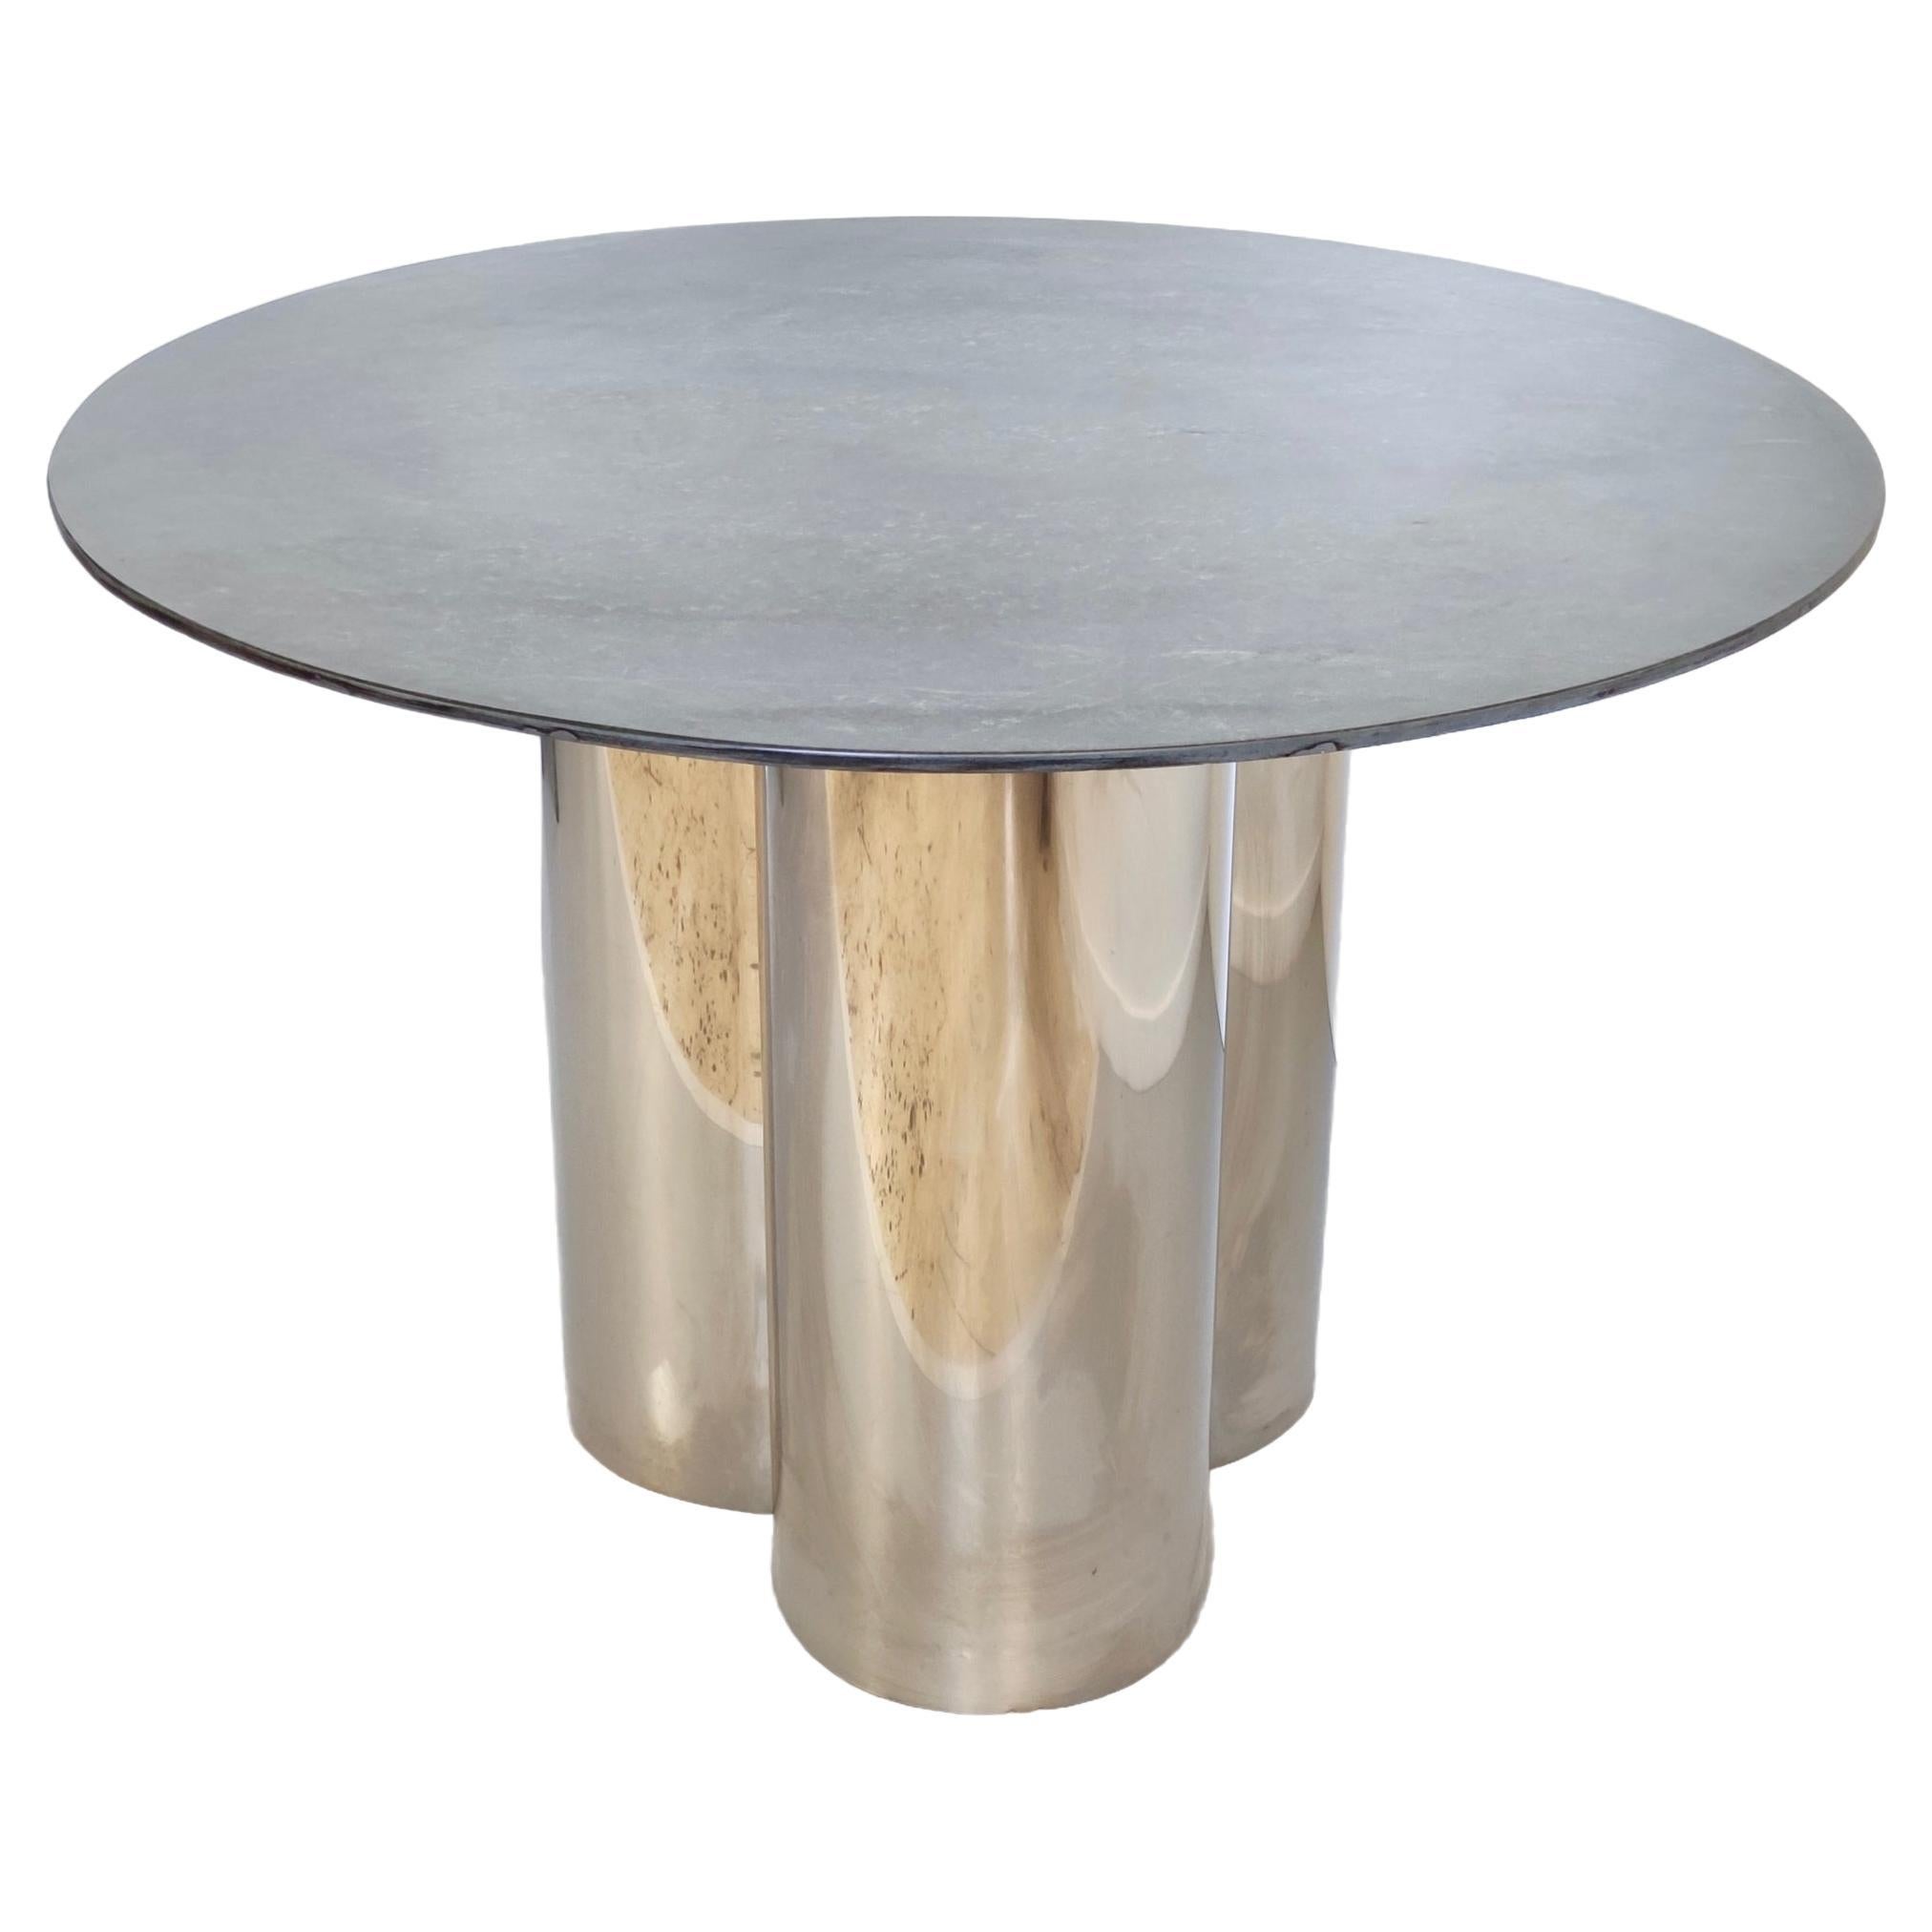 Postmodern Steel Dining Table with a Round Green Marble Top, Italy